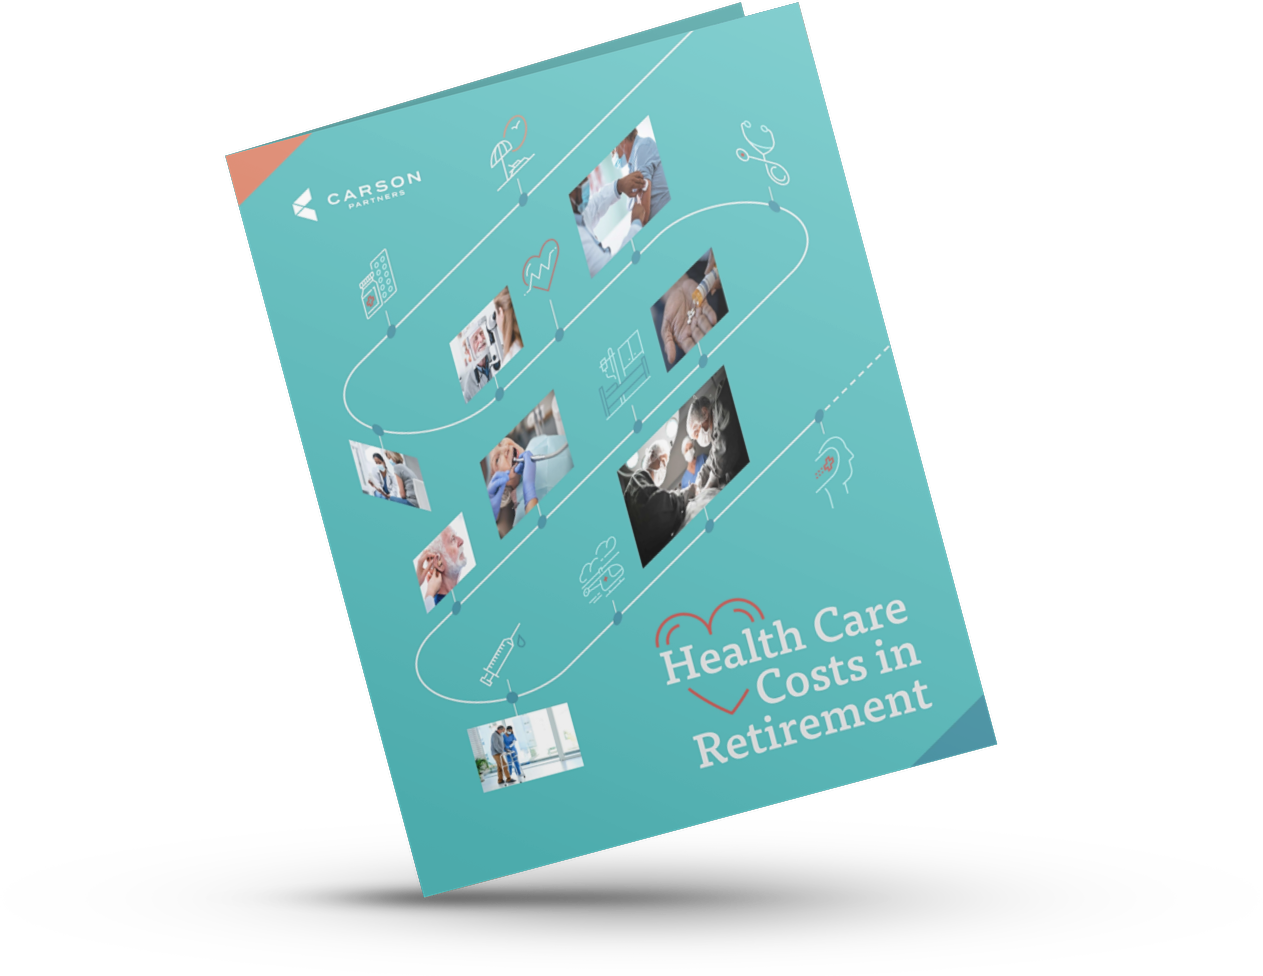 Resource: Health Care Costs in Retirement